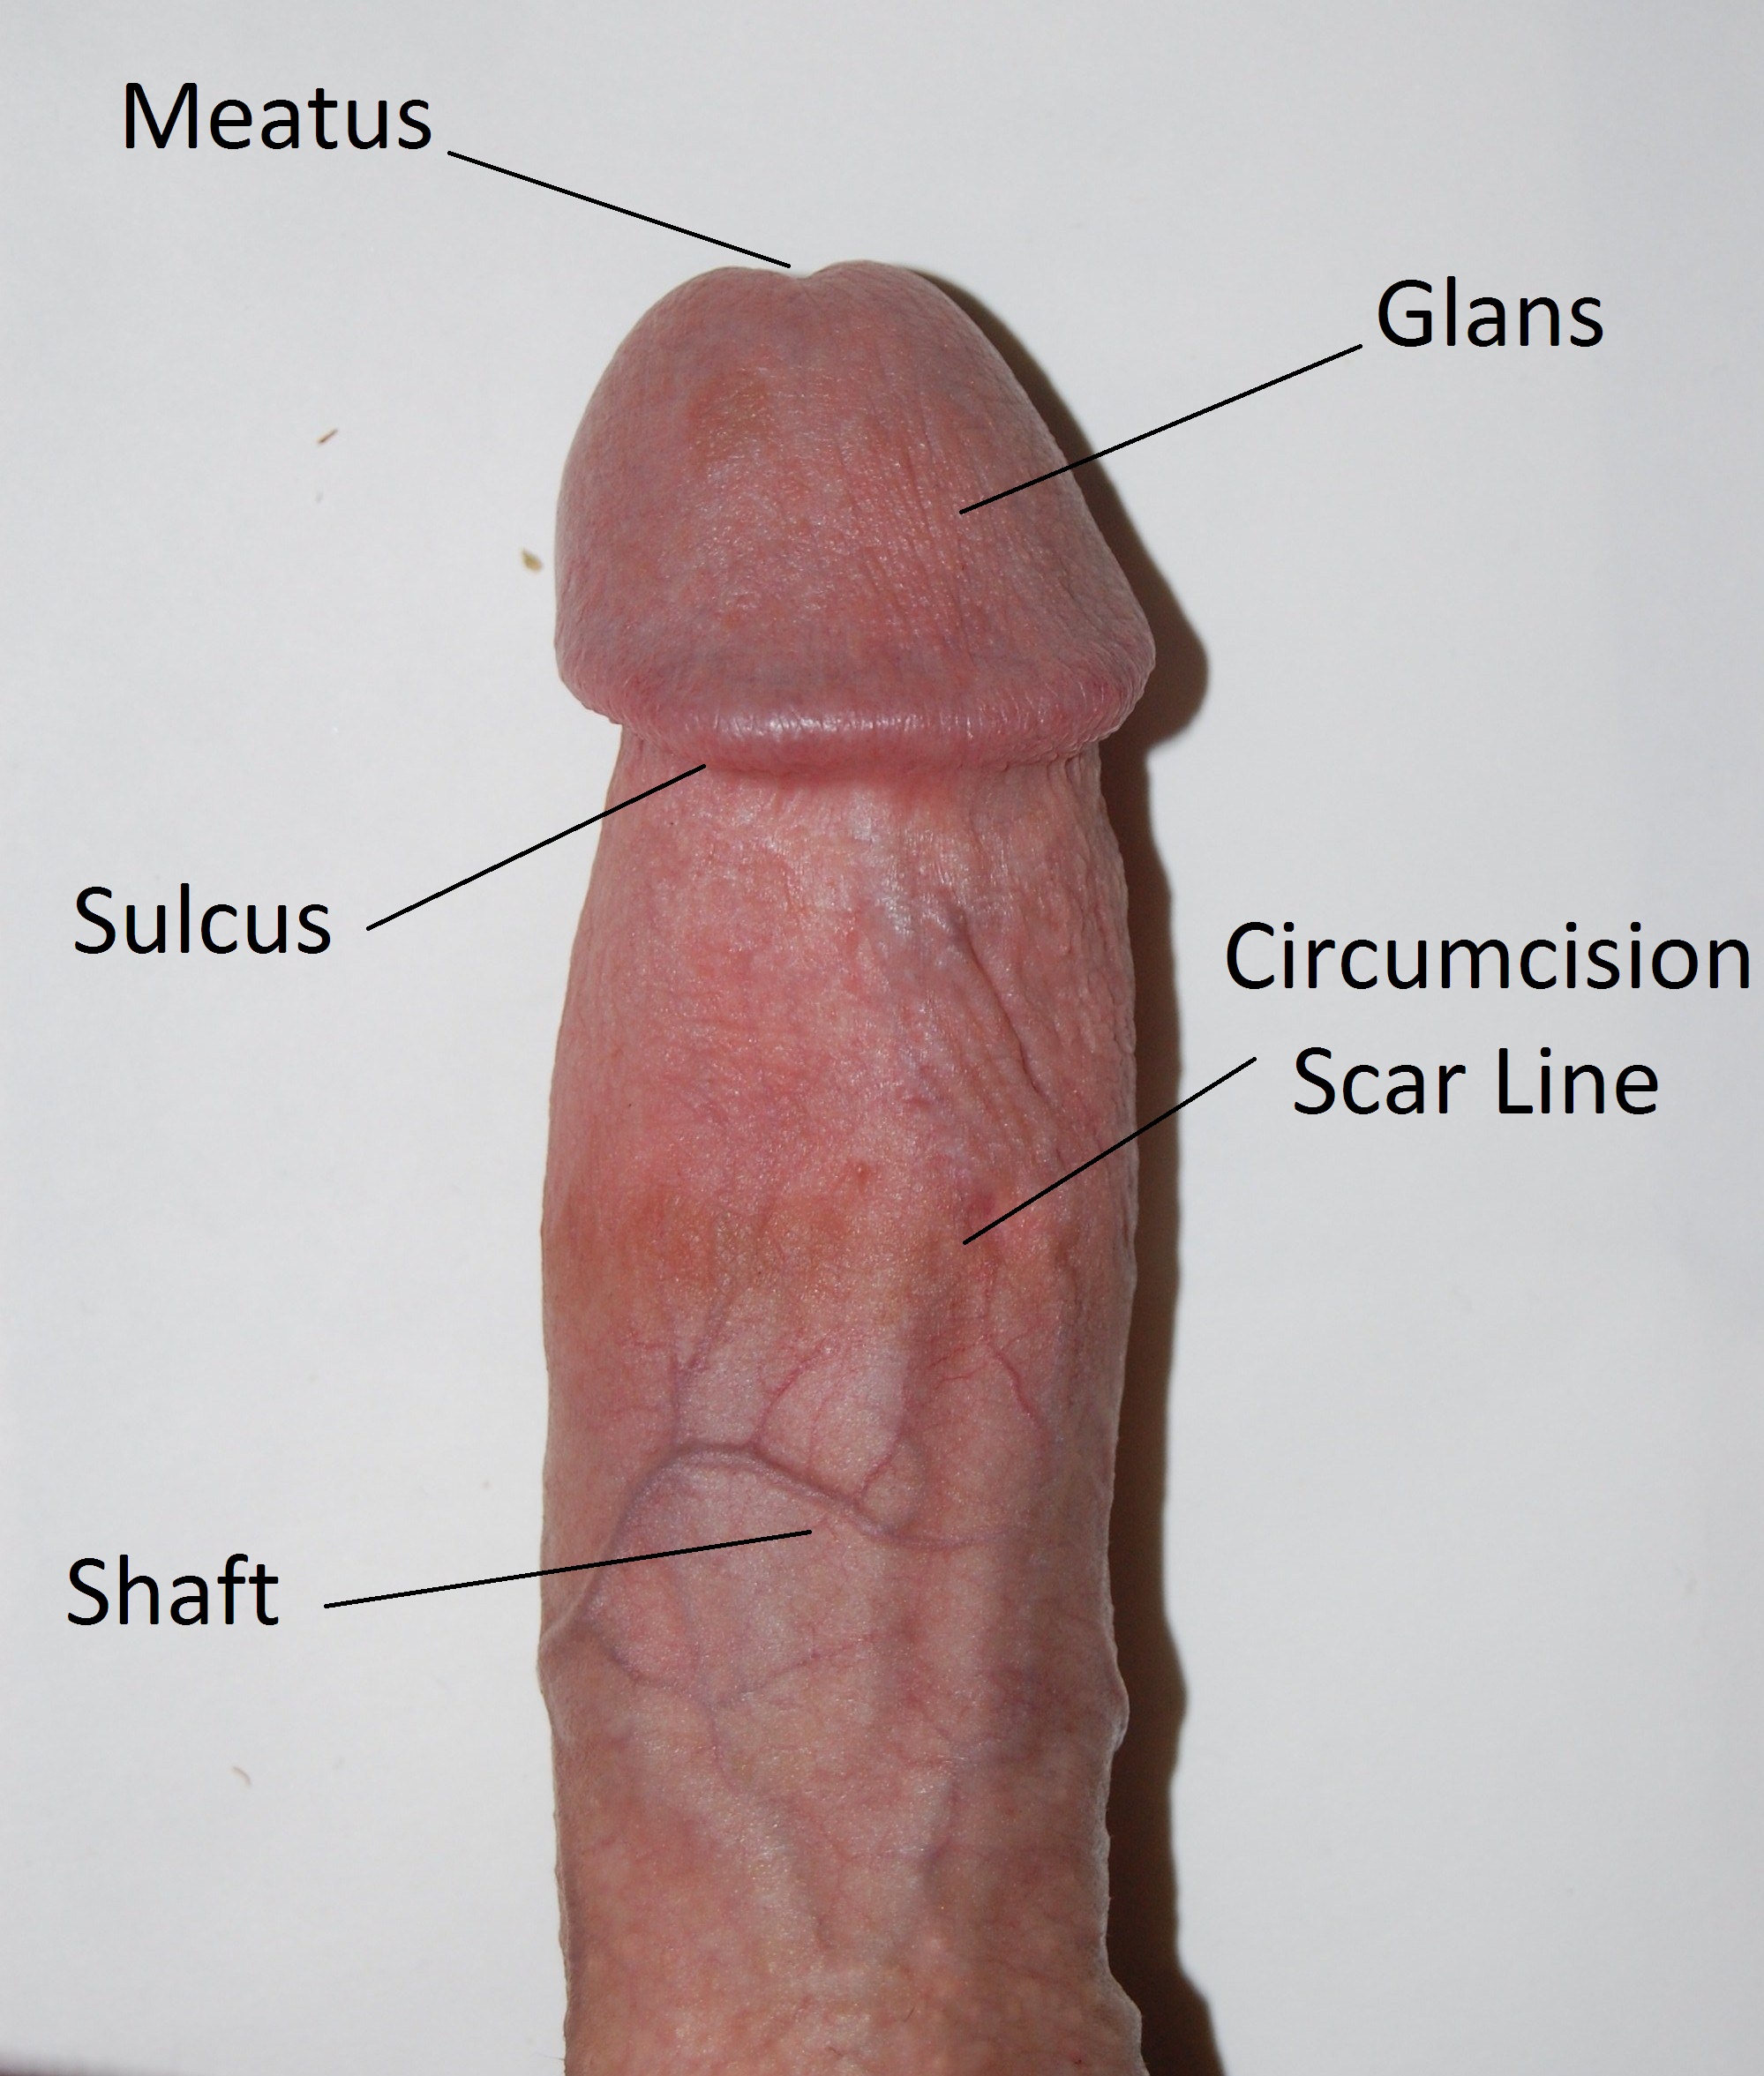 Penis Pictures of